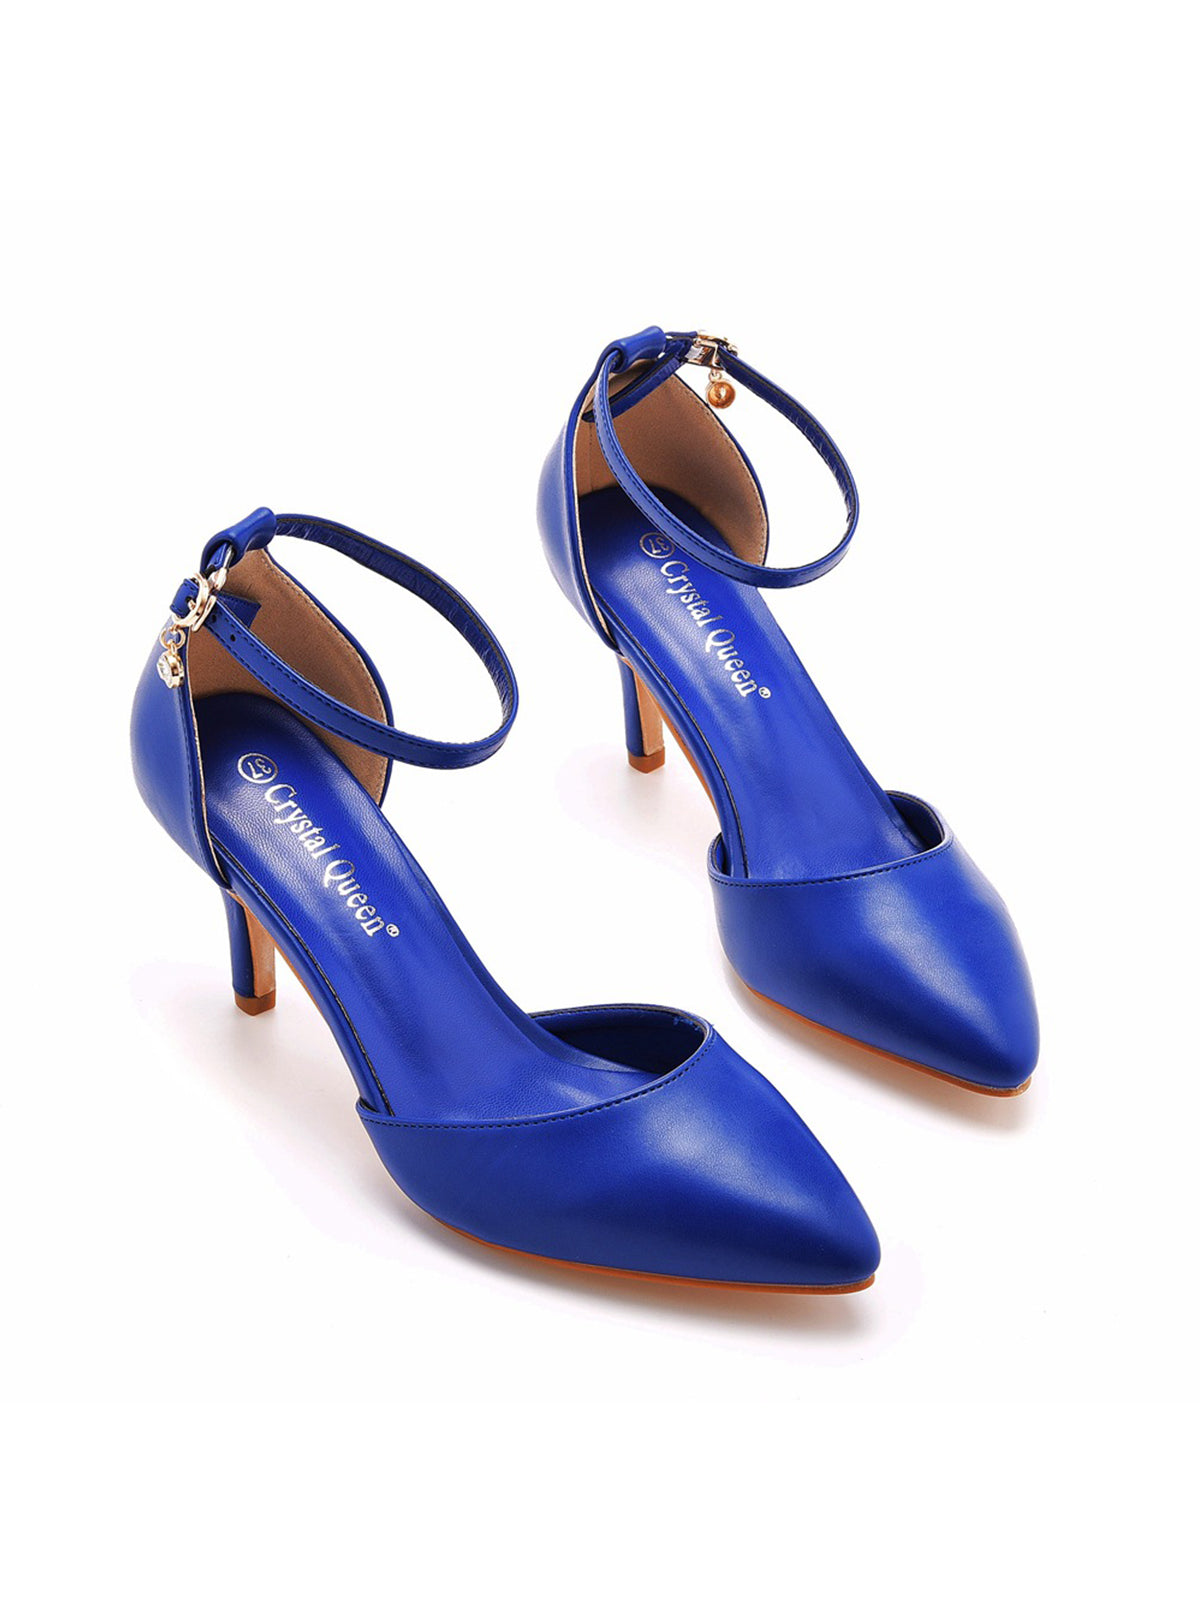 Women's Wedding Shoes Pointed Toe Ankle Strap Stiletto Heels